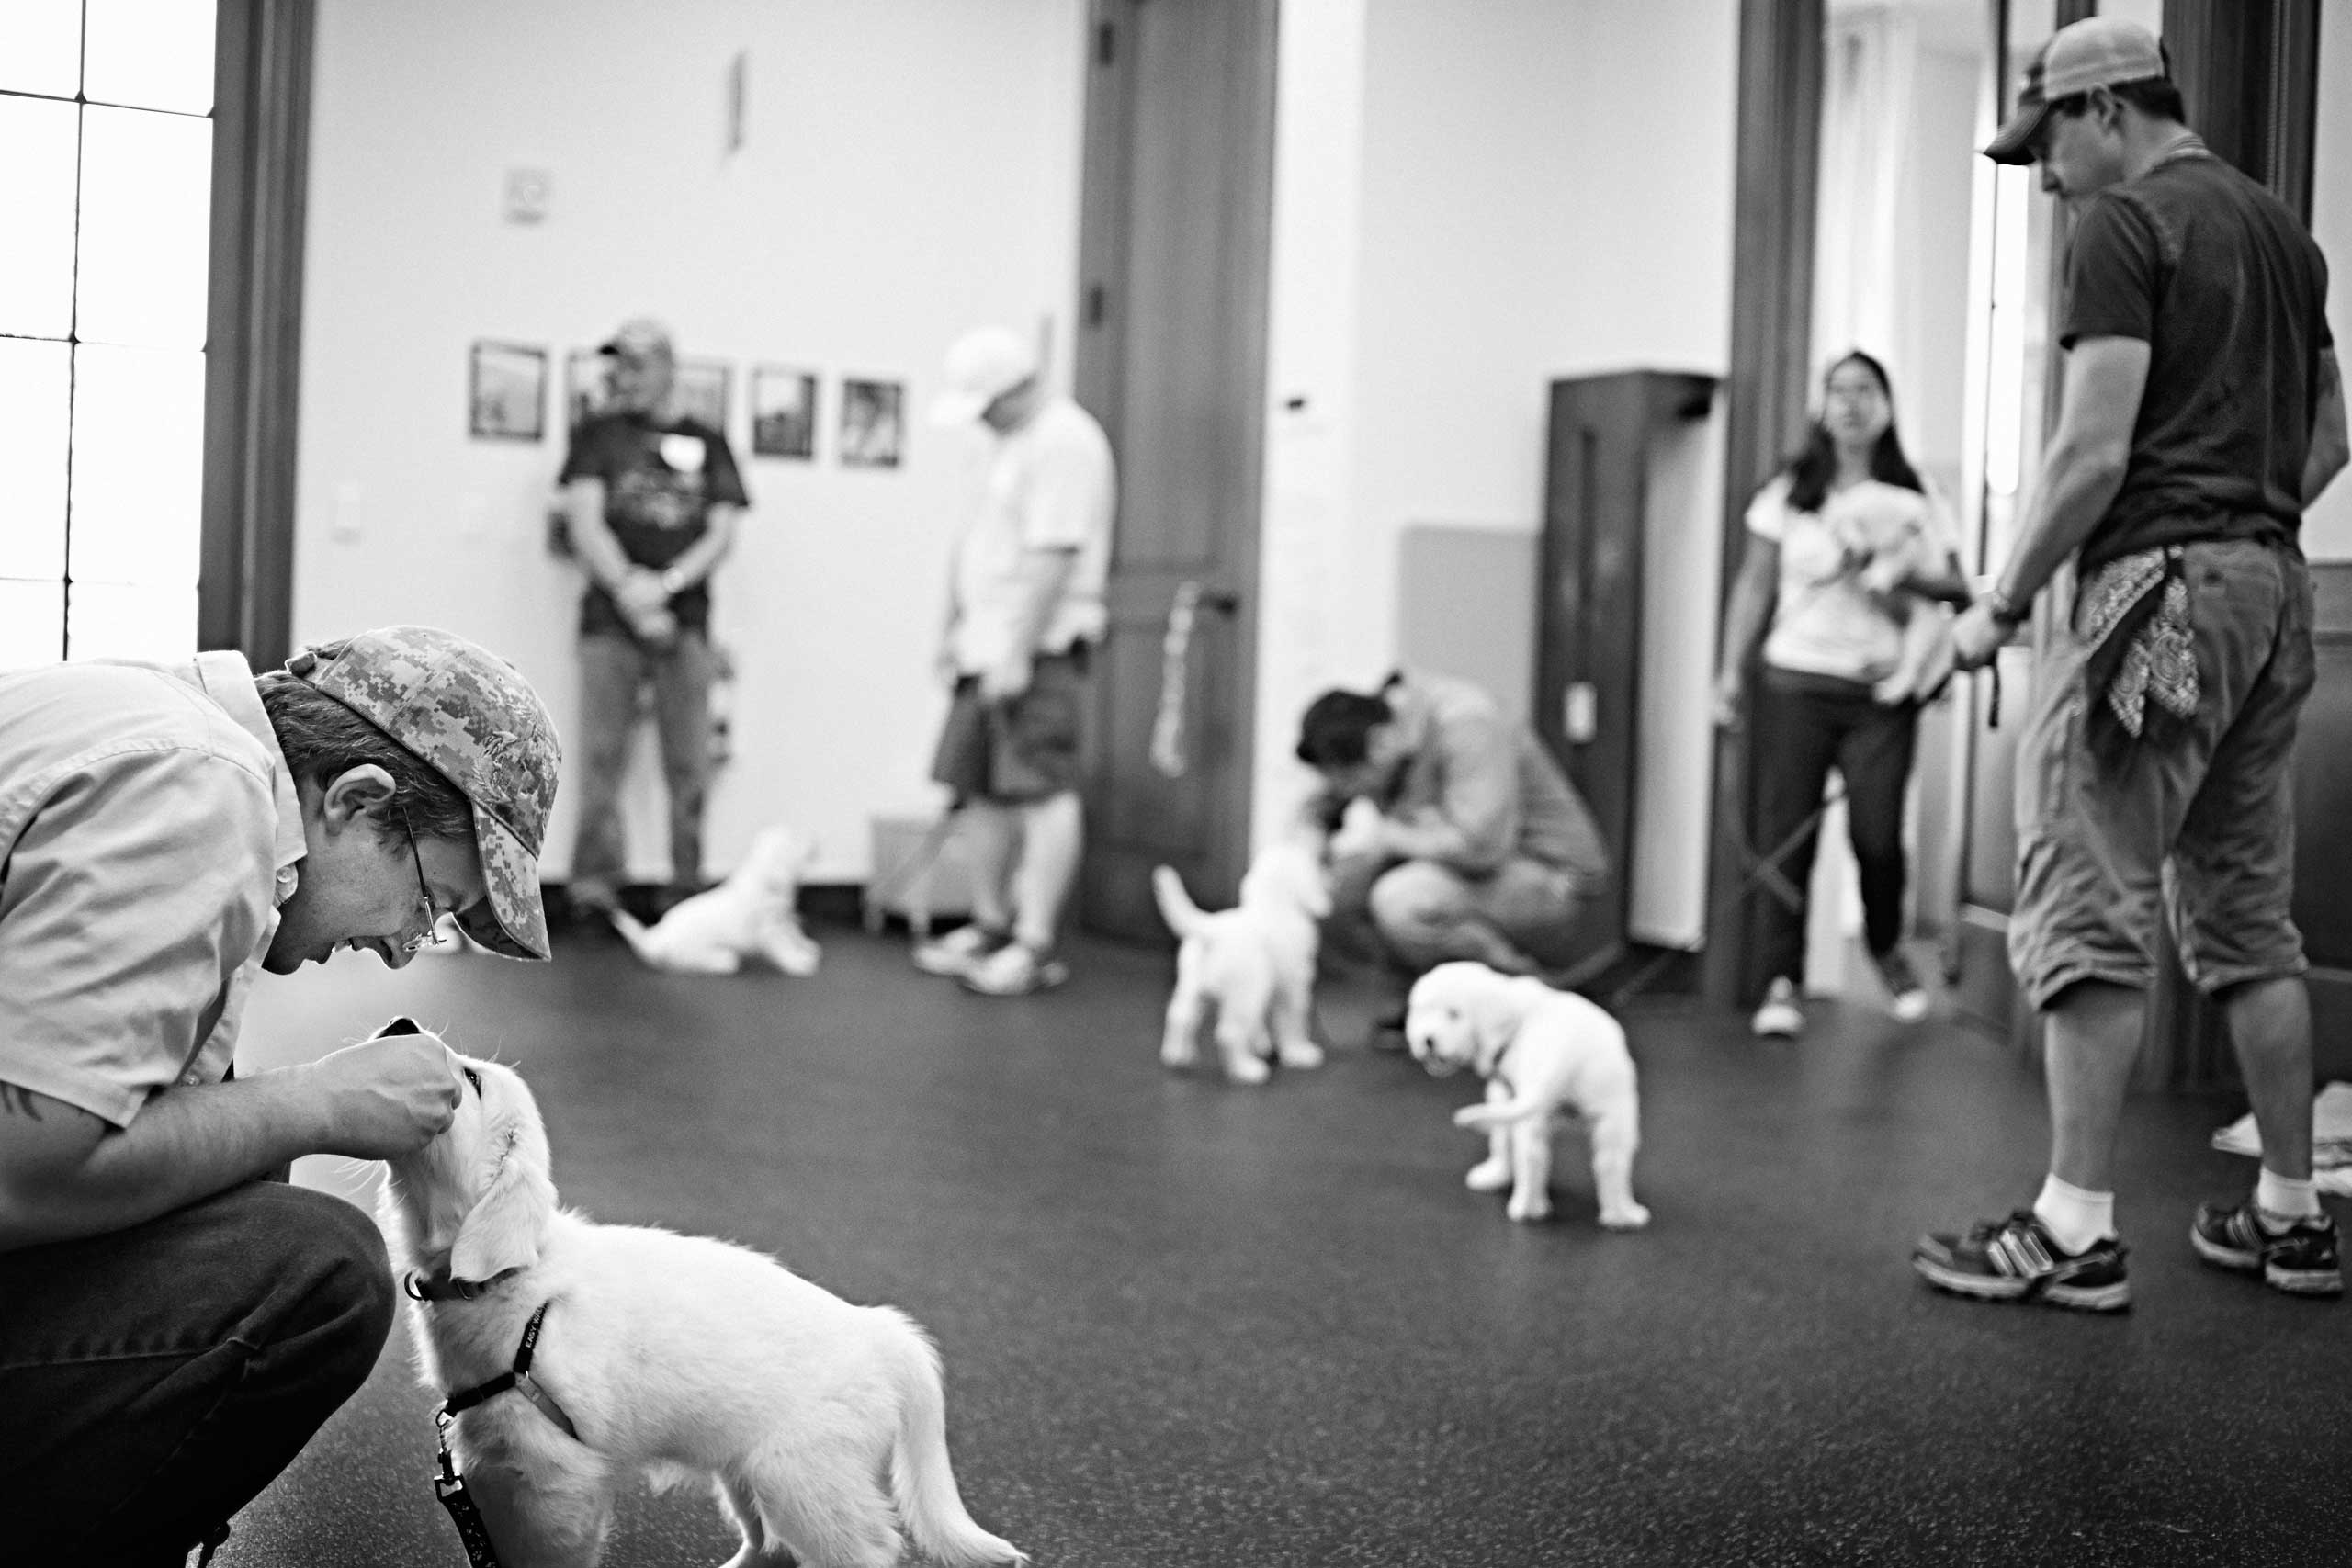 Marine Veteran Paul Robicheaux works with a puppy during the Men’s Trauma Recovery Program dog training session at the VA’s Menlo Park campus in California, United States on October 3, 2014.
                              
                              US Marine Corps Veteran Paul Robicheaux served with 1st Battalion, 12th Marines at Marine Corps Base Hawaii between 1993 and 1997.
                              
                              Paws for Purple Hearts is the first program of its kind to offer therapeutic intervention for Veterans and active-duty military personnel by teaching those with Post-Traumatic Stress Disorder (PTSD) to train service dogs for their comrades with combat-related injuries.